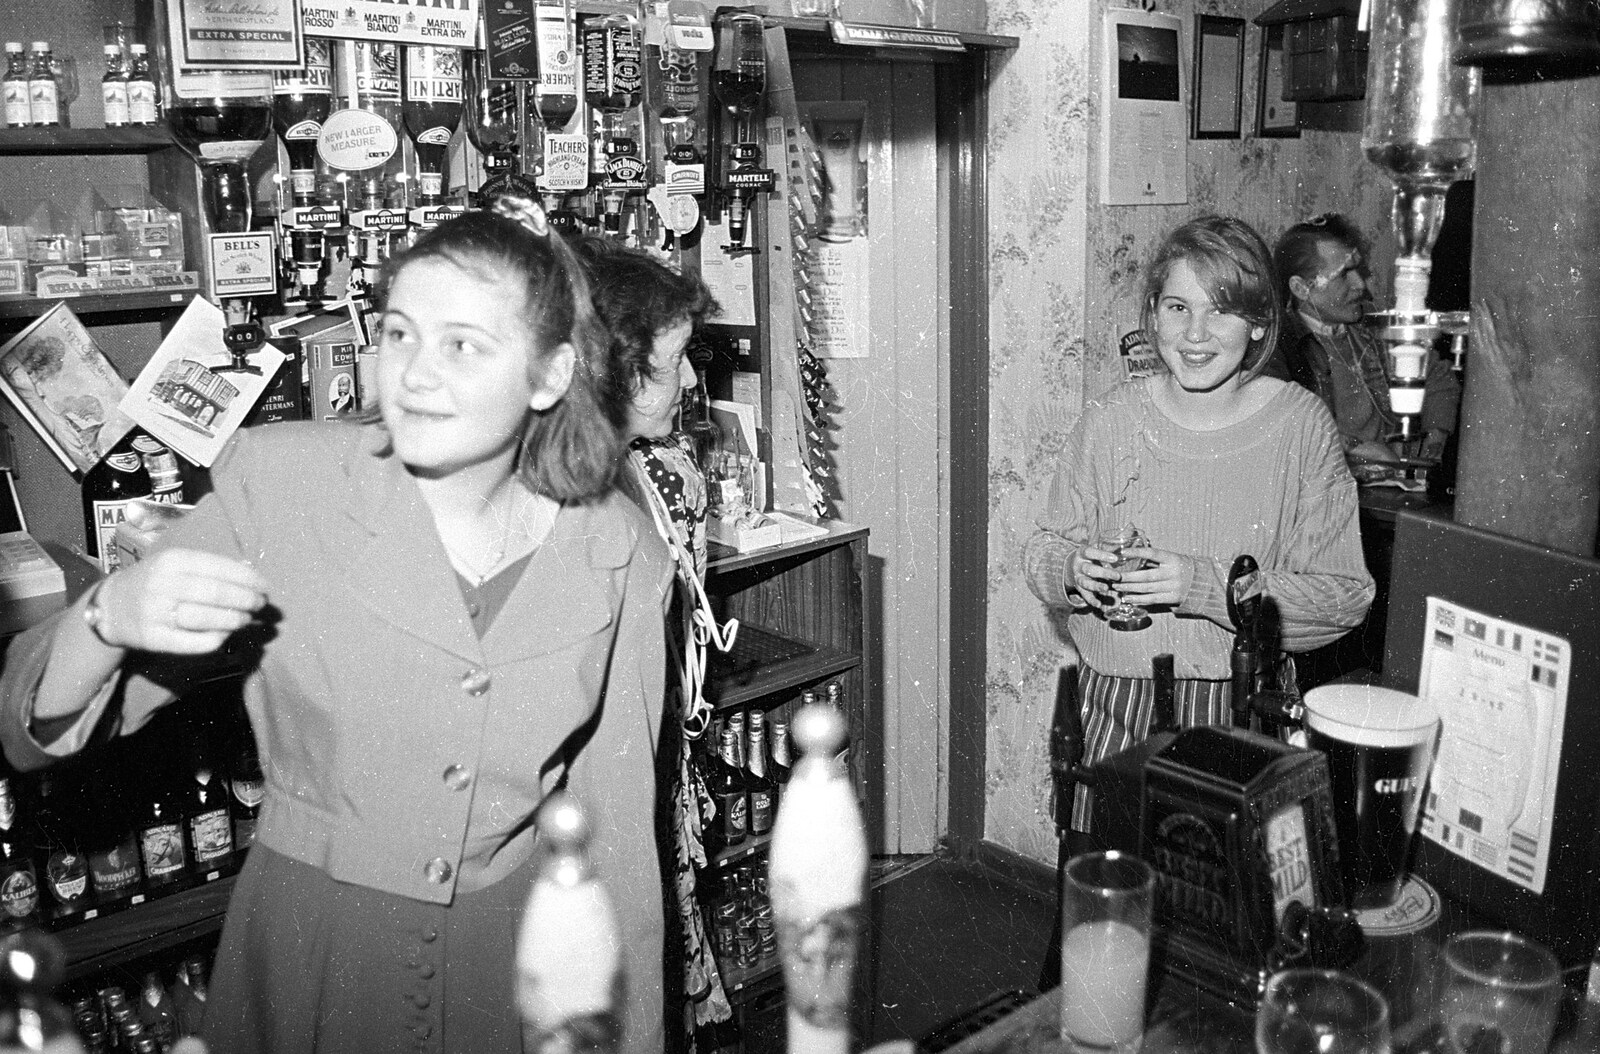 Claire and Lorraine from New Year's Eve at the Swan Inn, Brome, Suffolk - 31st December 1992